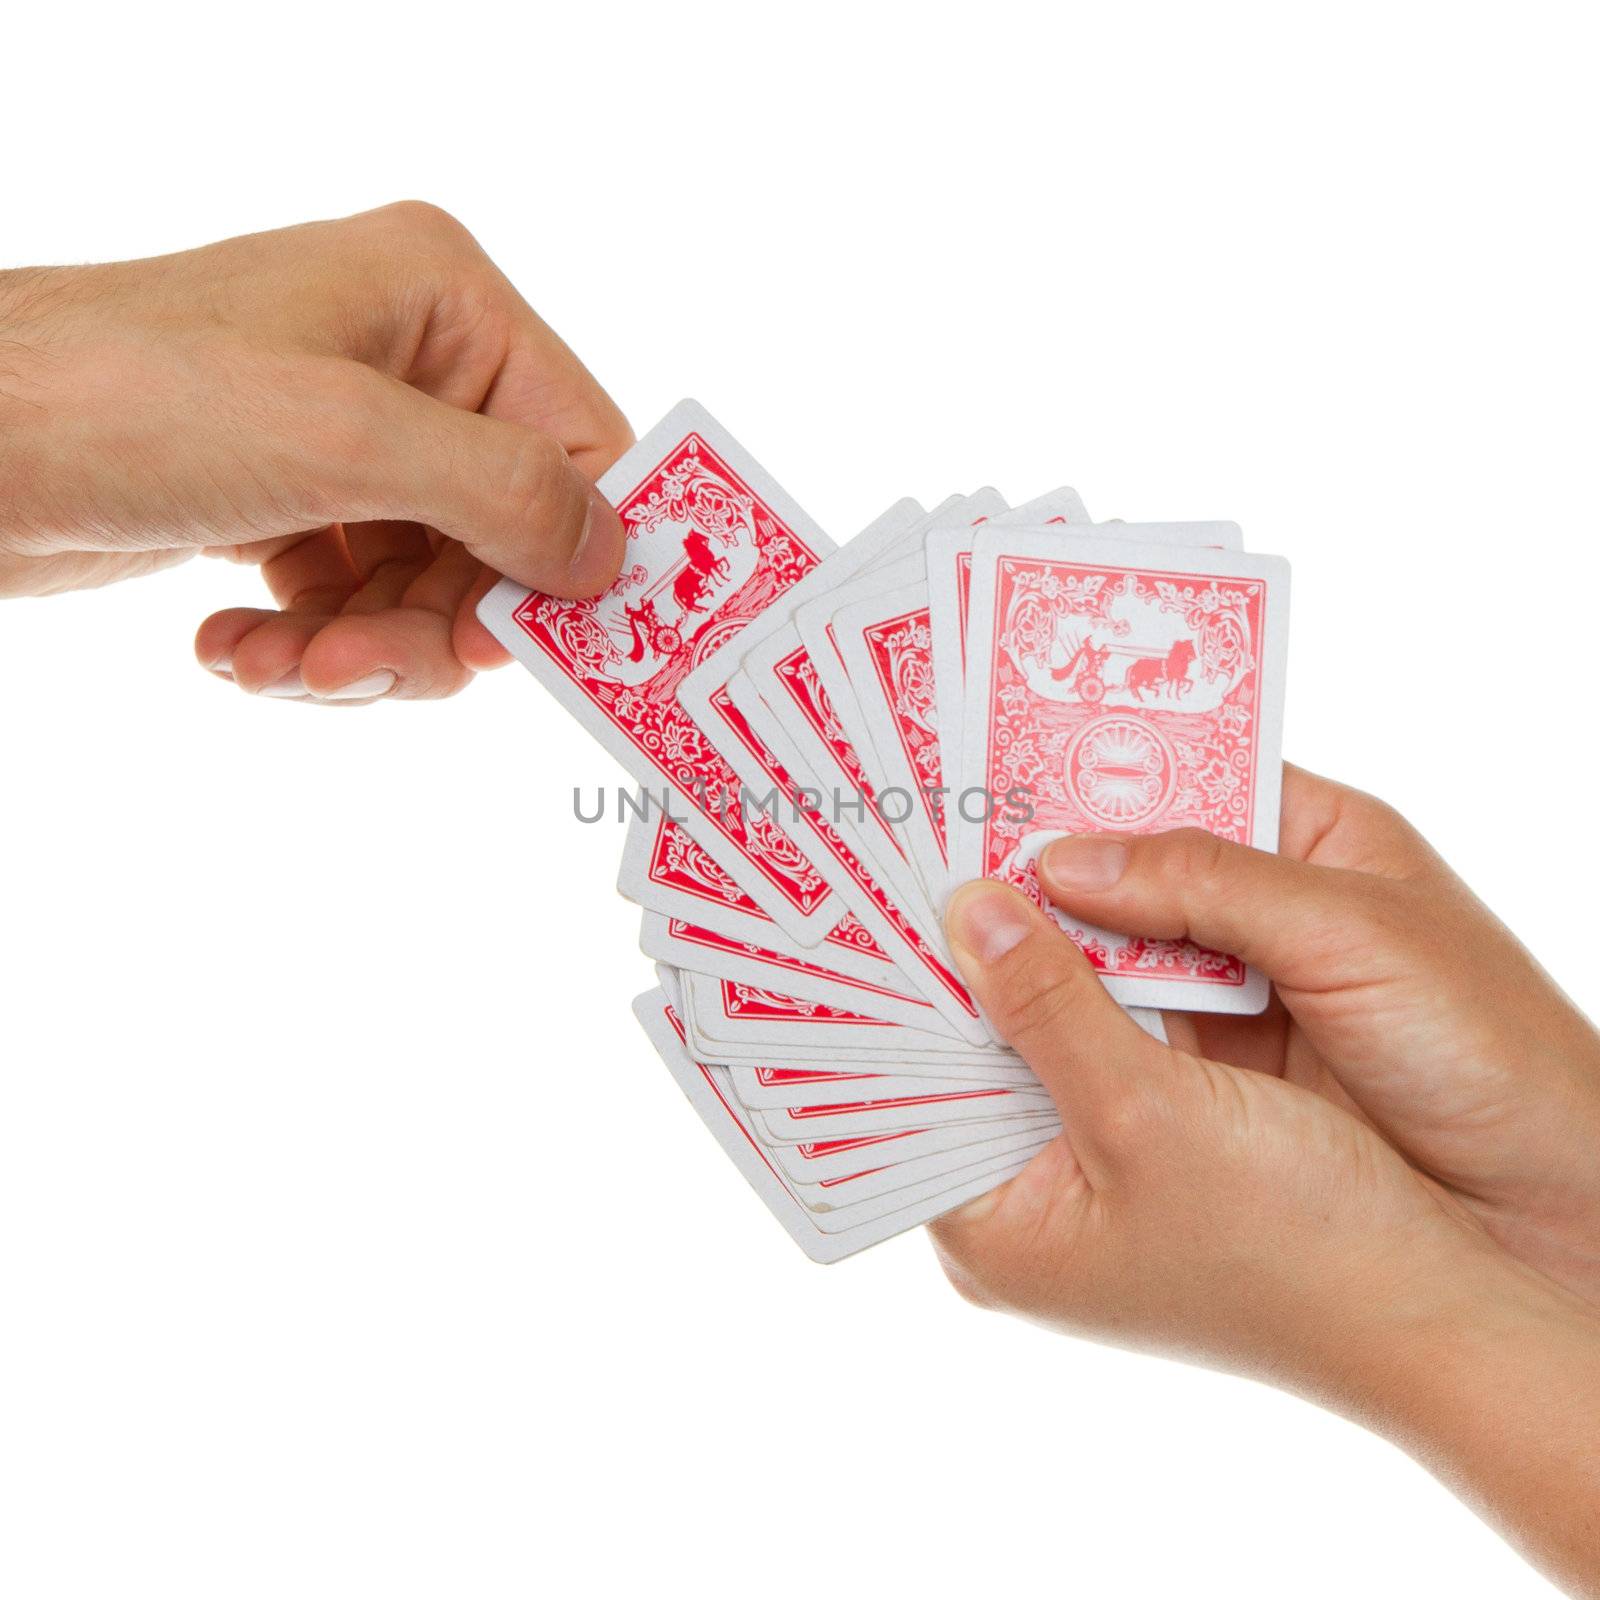 Man picking a playing card from a deck of cards